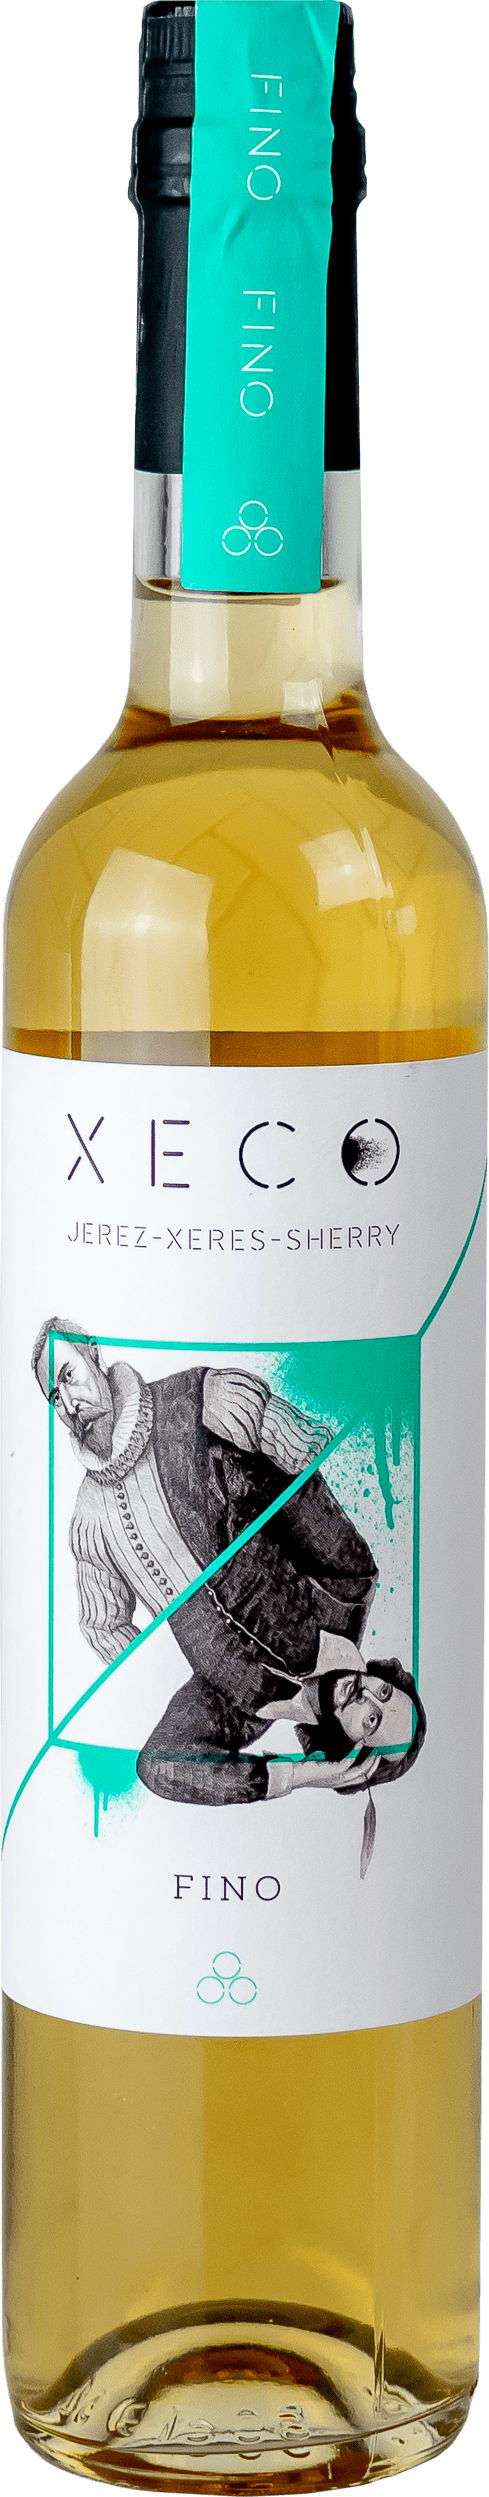 Xeco Fino, 50cl 50cl NV - Buy Xeco Wines from GREAT WINES DIRECT wine shop